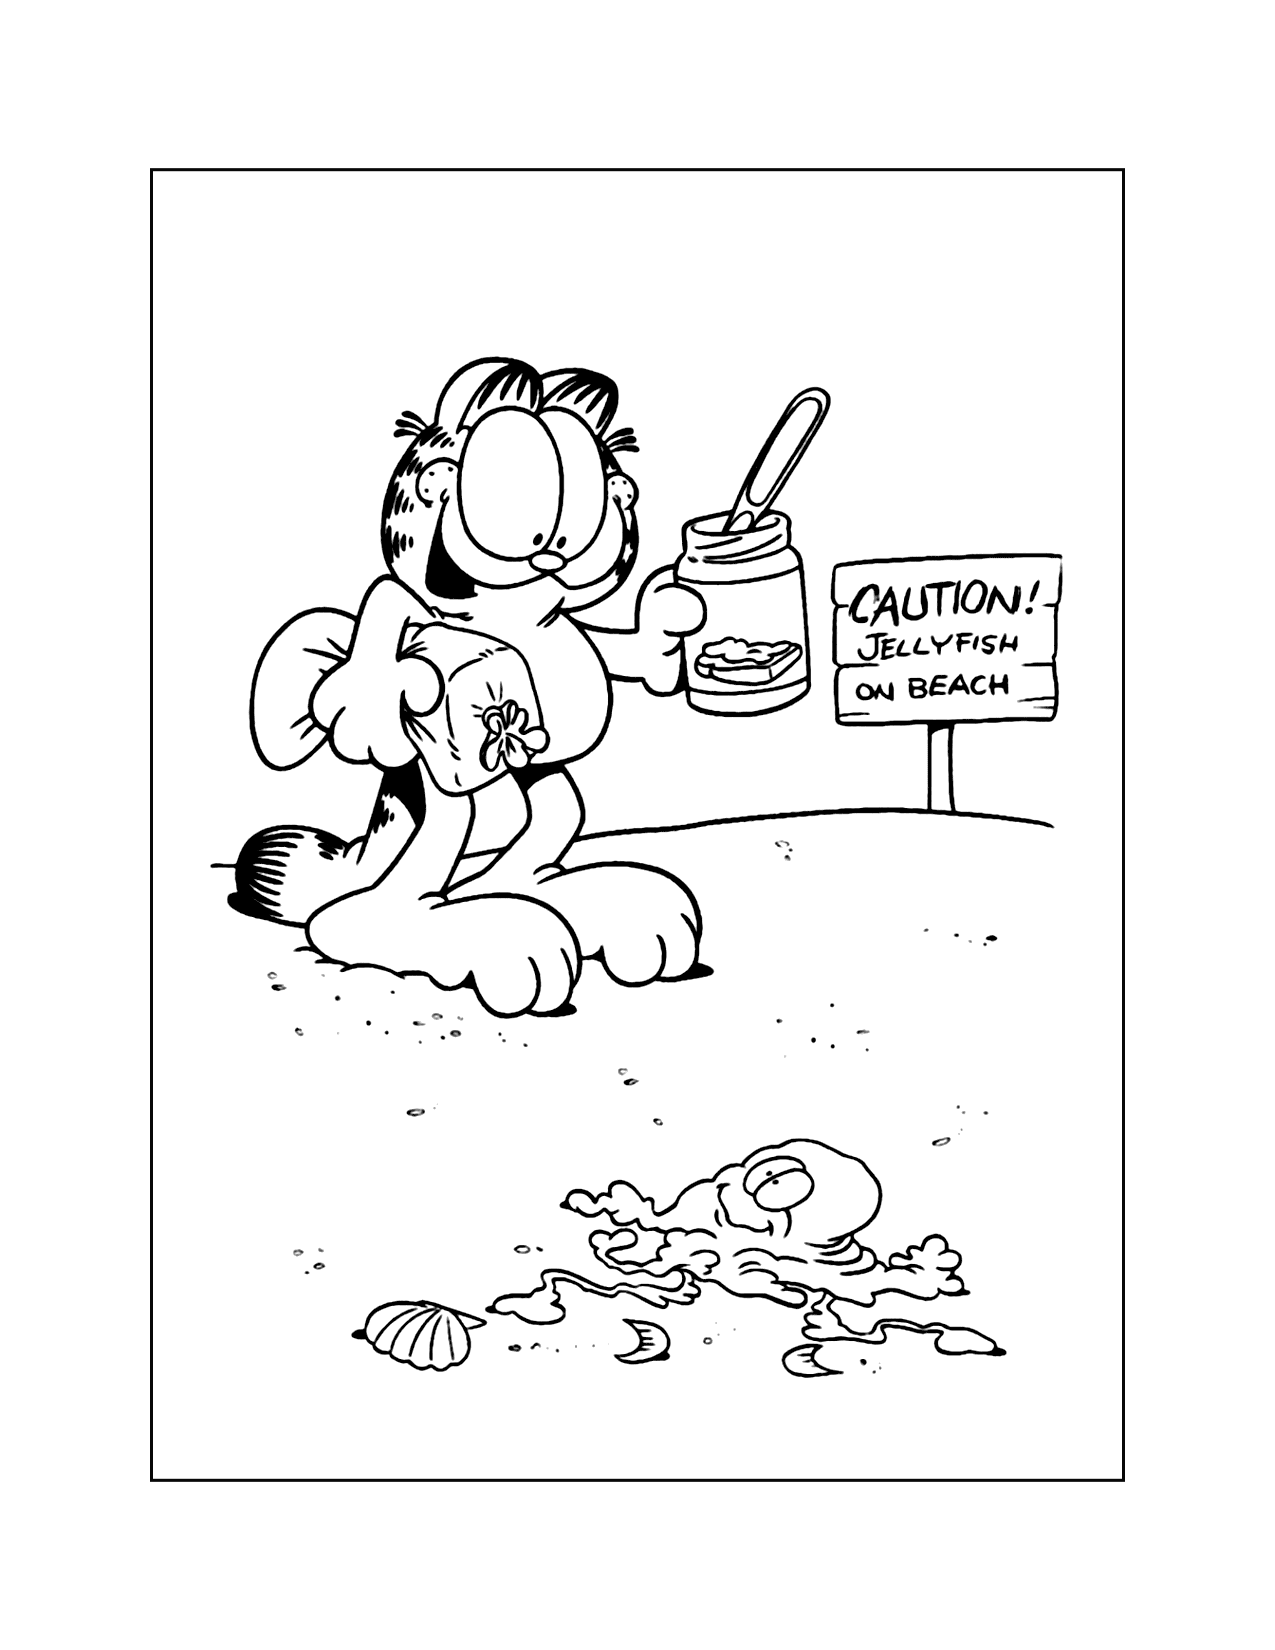 Funny Garfield Peanut Butter And Jellyfish Coloring Page